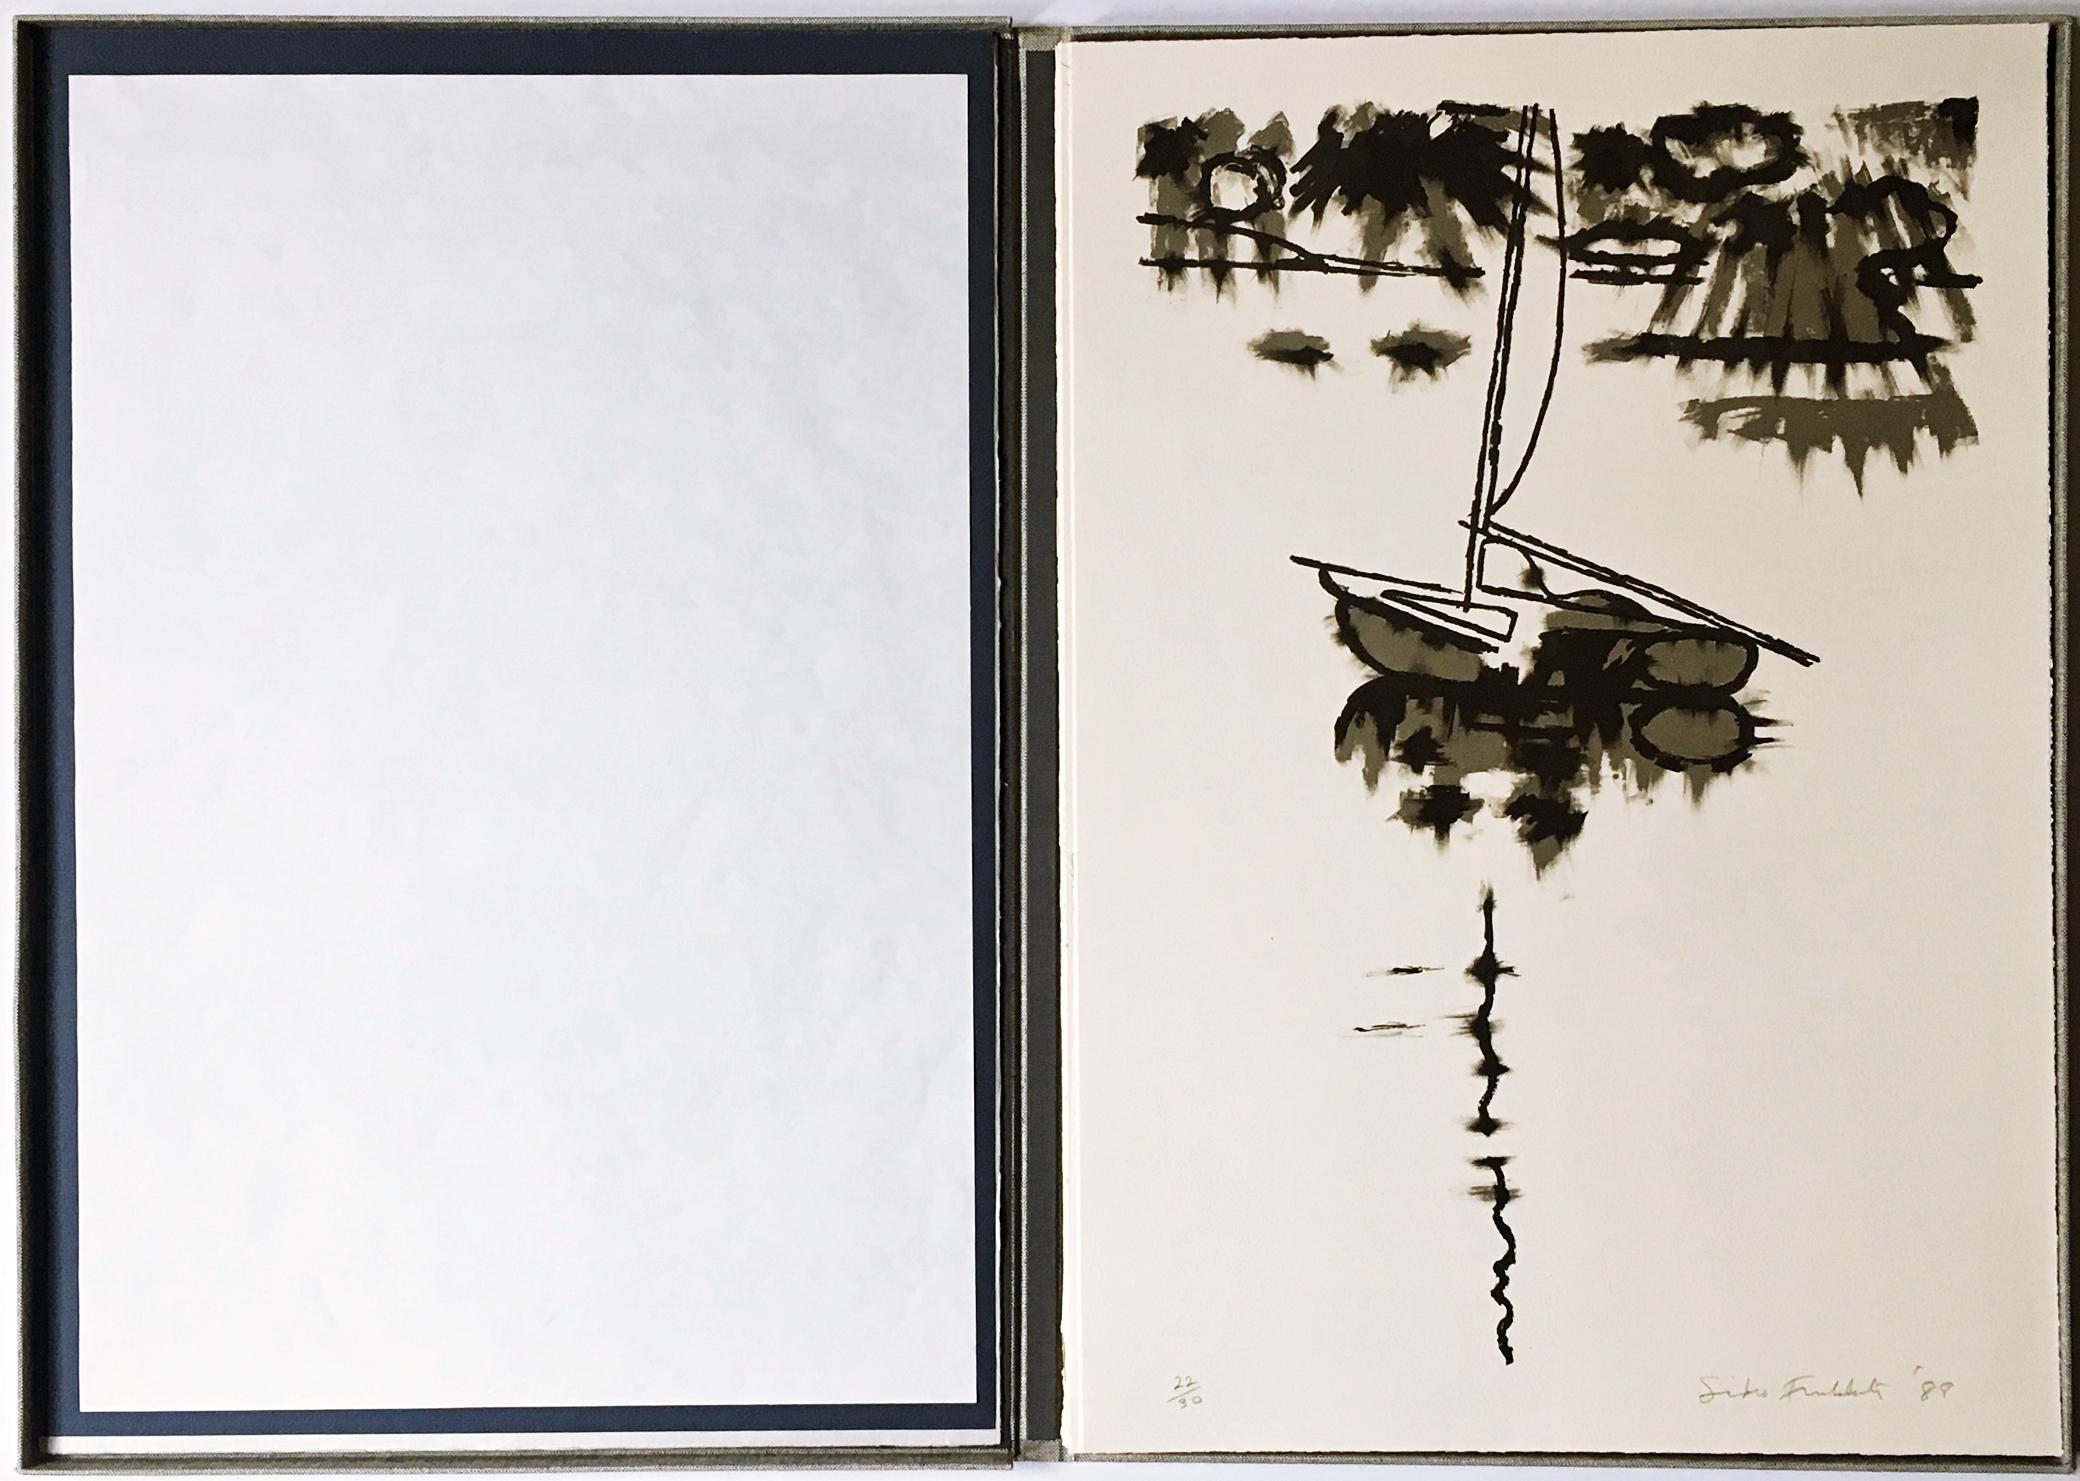 Sideo Fromboluti
Untitled, from the Long Point Gallery Portfolio, 1988
Lithograph on paper with deckled edges. Hand Signed. Numbered 22/30. Dated. 
22 × 15 inches
Publisher: Long Point Gallery, Inc., Provincetown, Massachusetts; Printer: Bruce